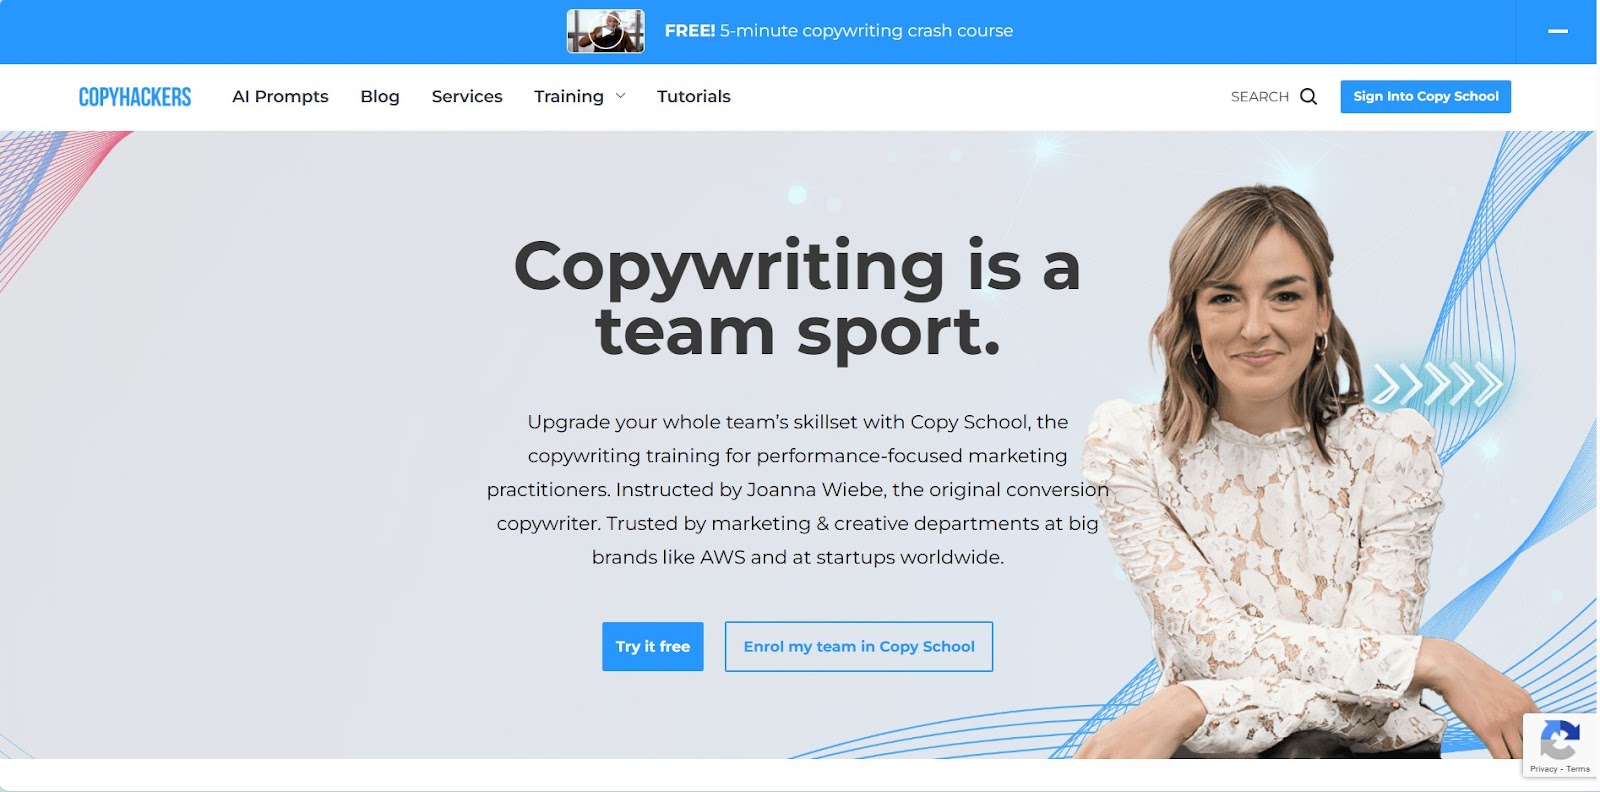 article writing paying sites